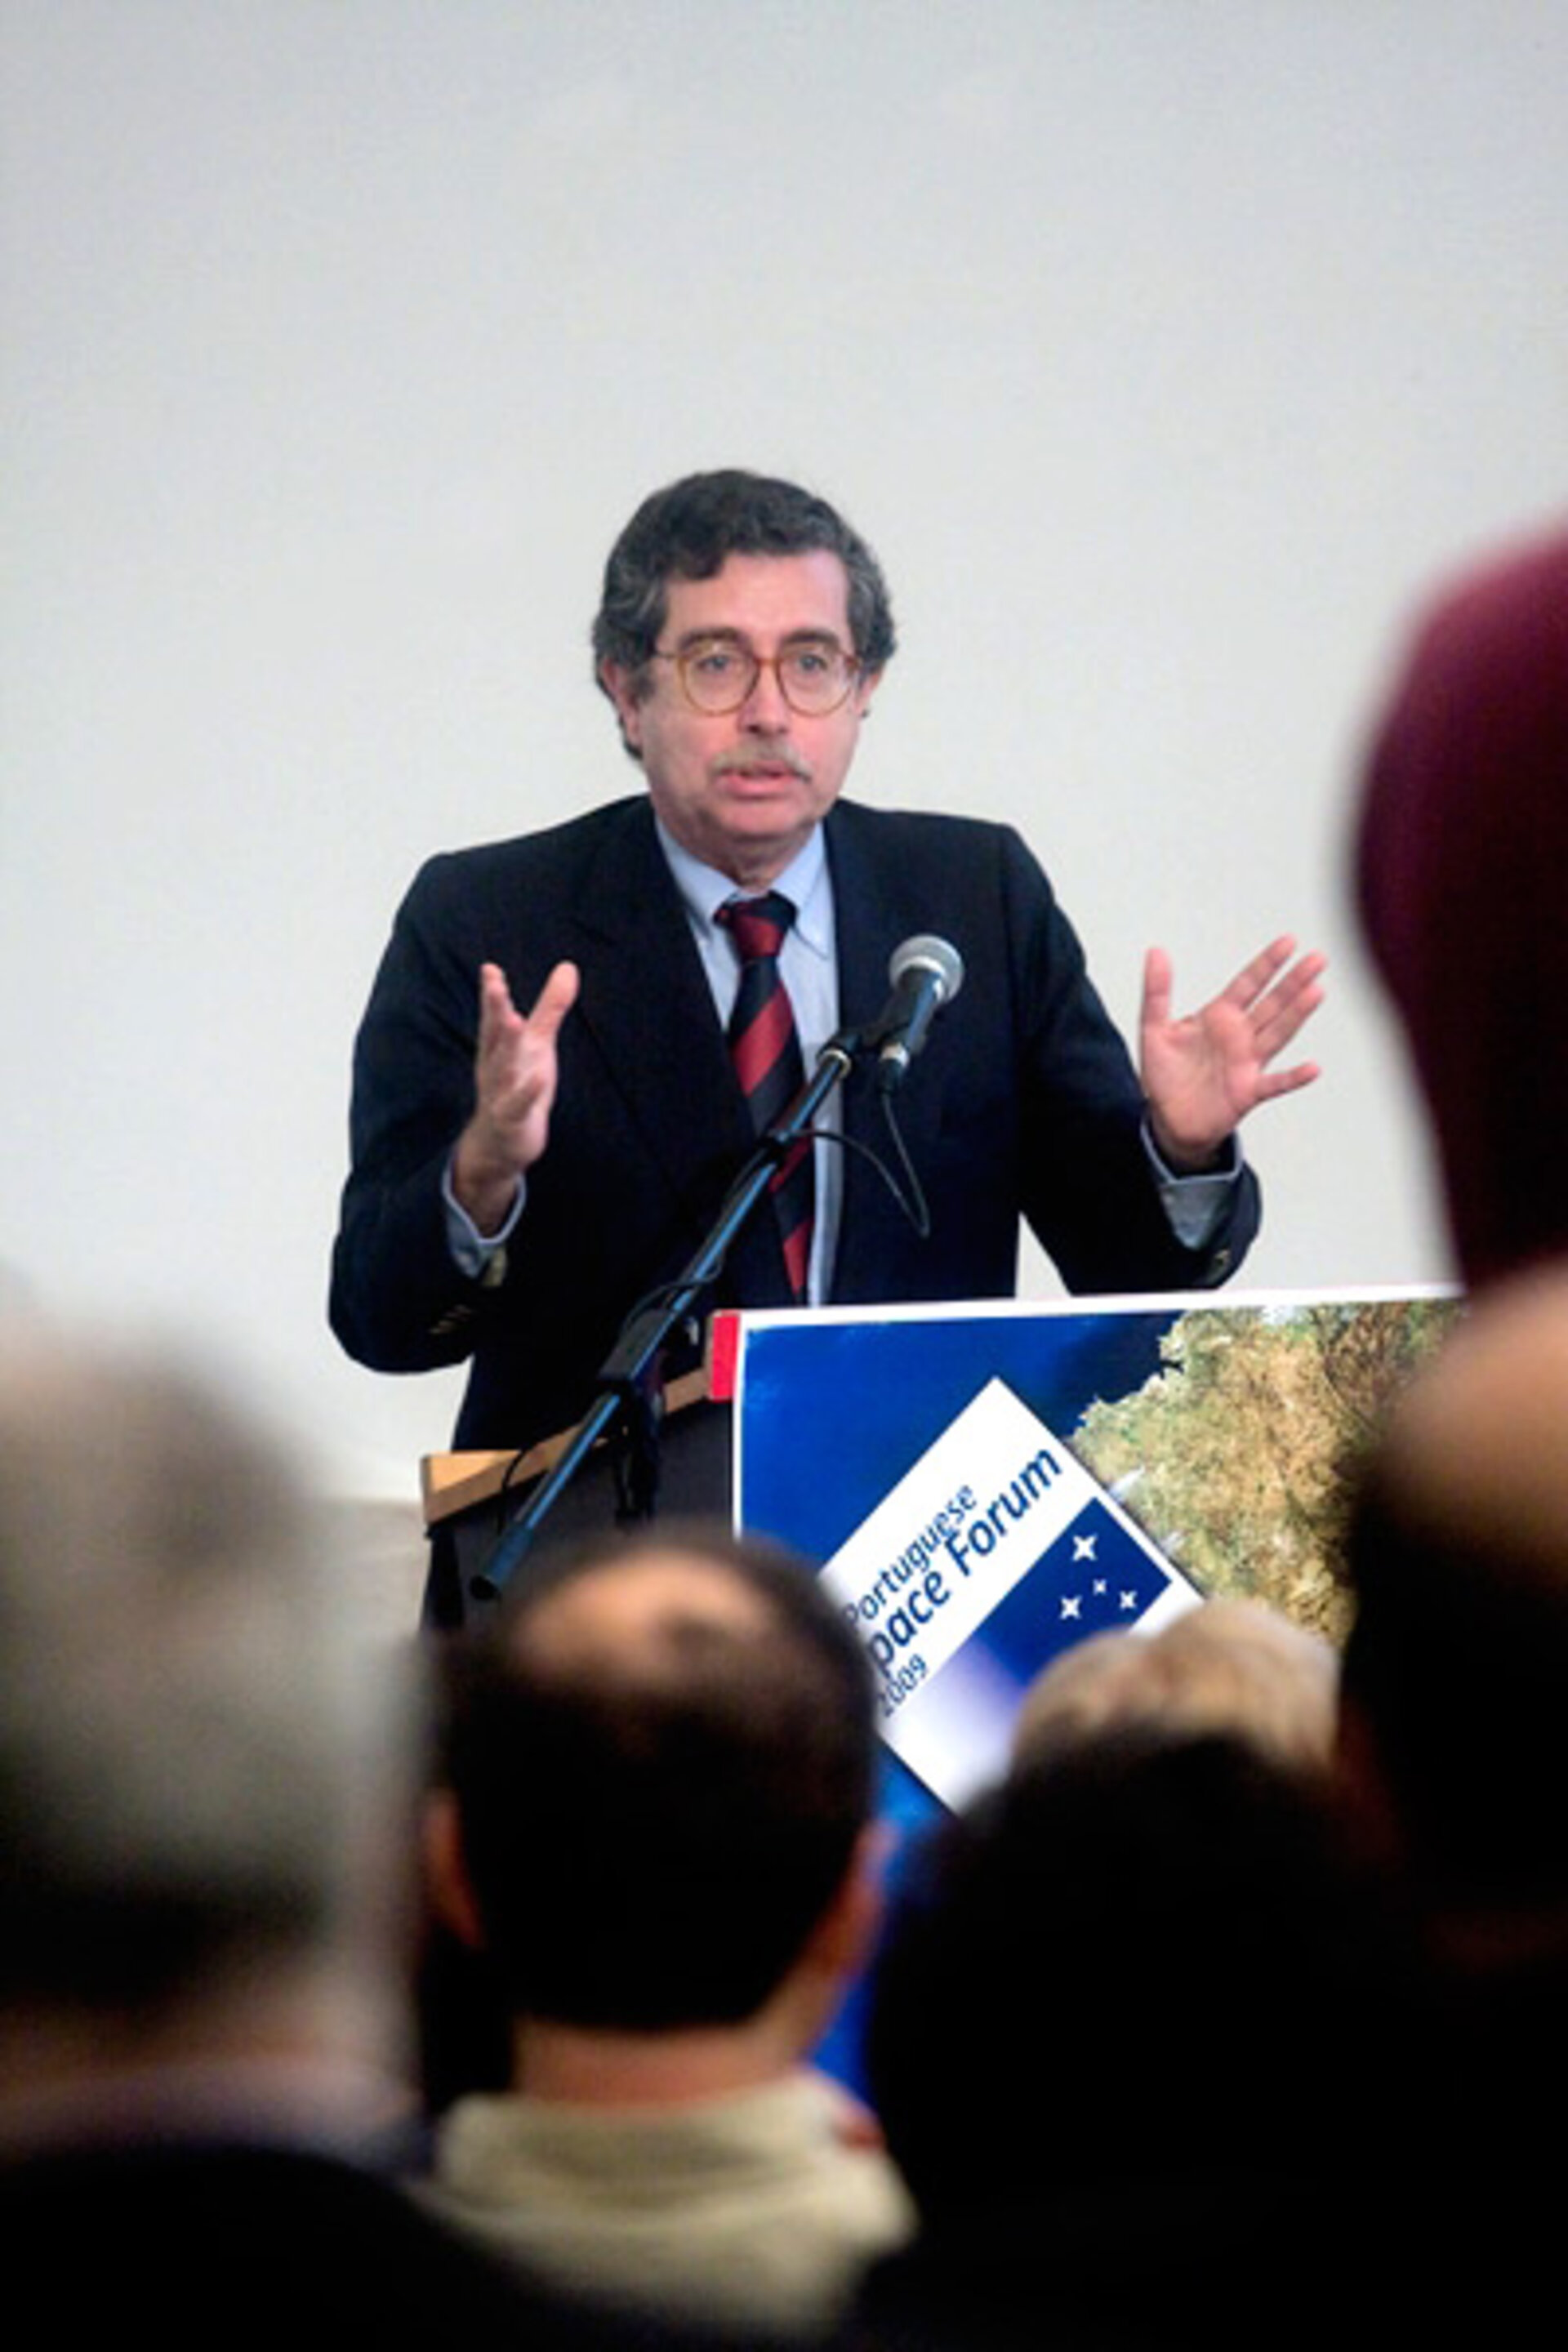 Portuguese Minister of Science Technology and Higher Education, José Mariano Gago